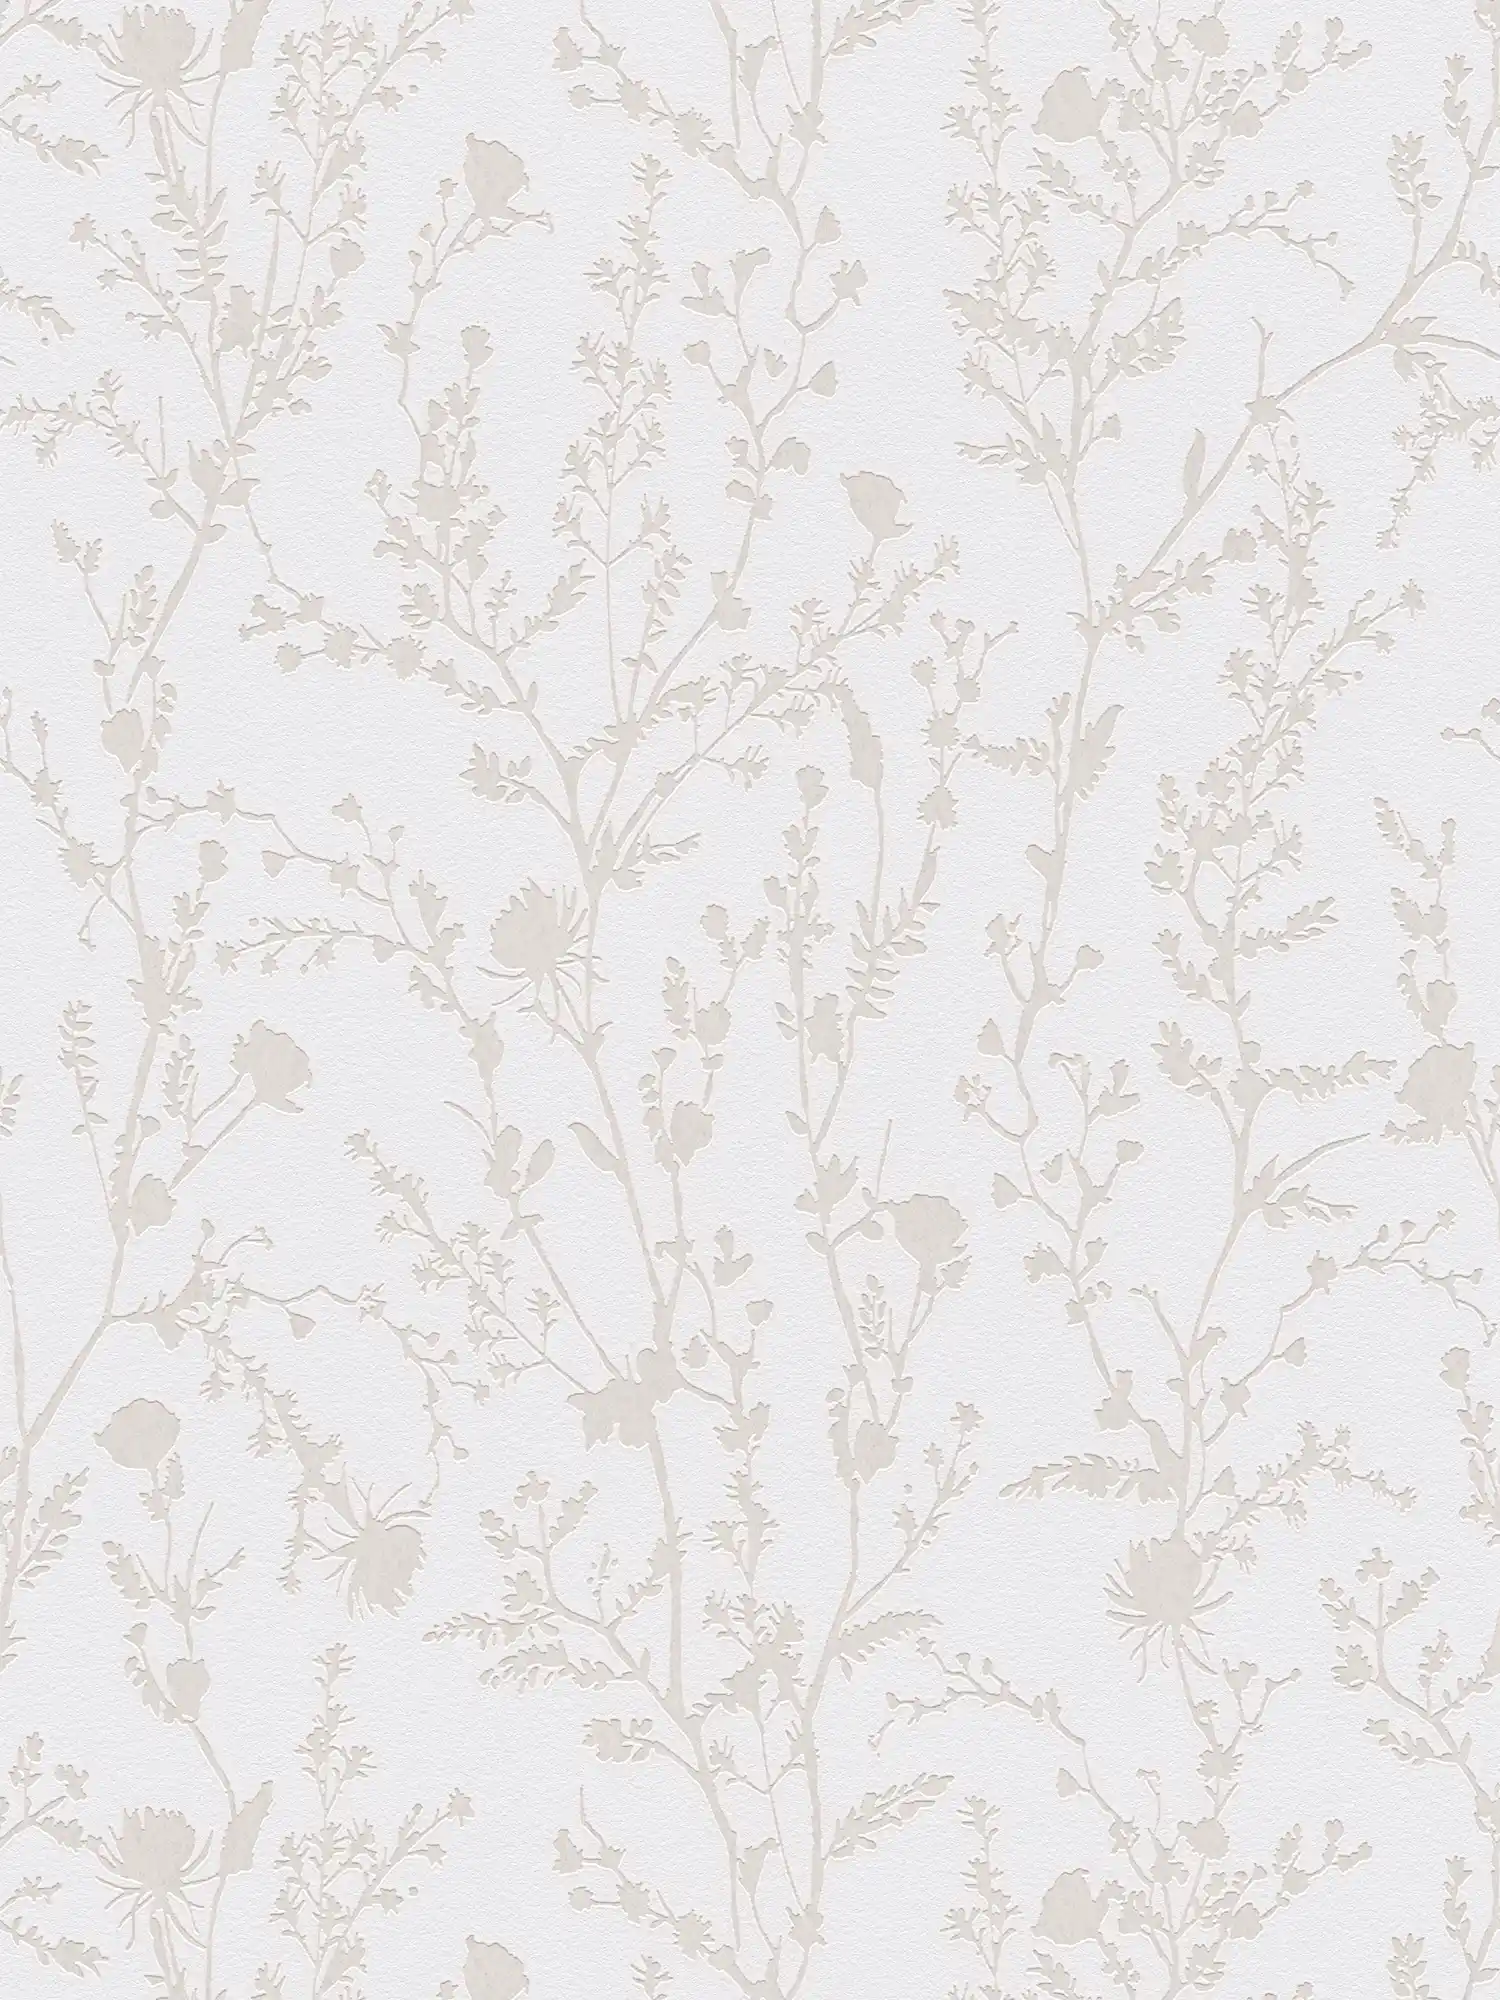 Non-woven wallpaper with floral pattern - light grey, white
